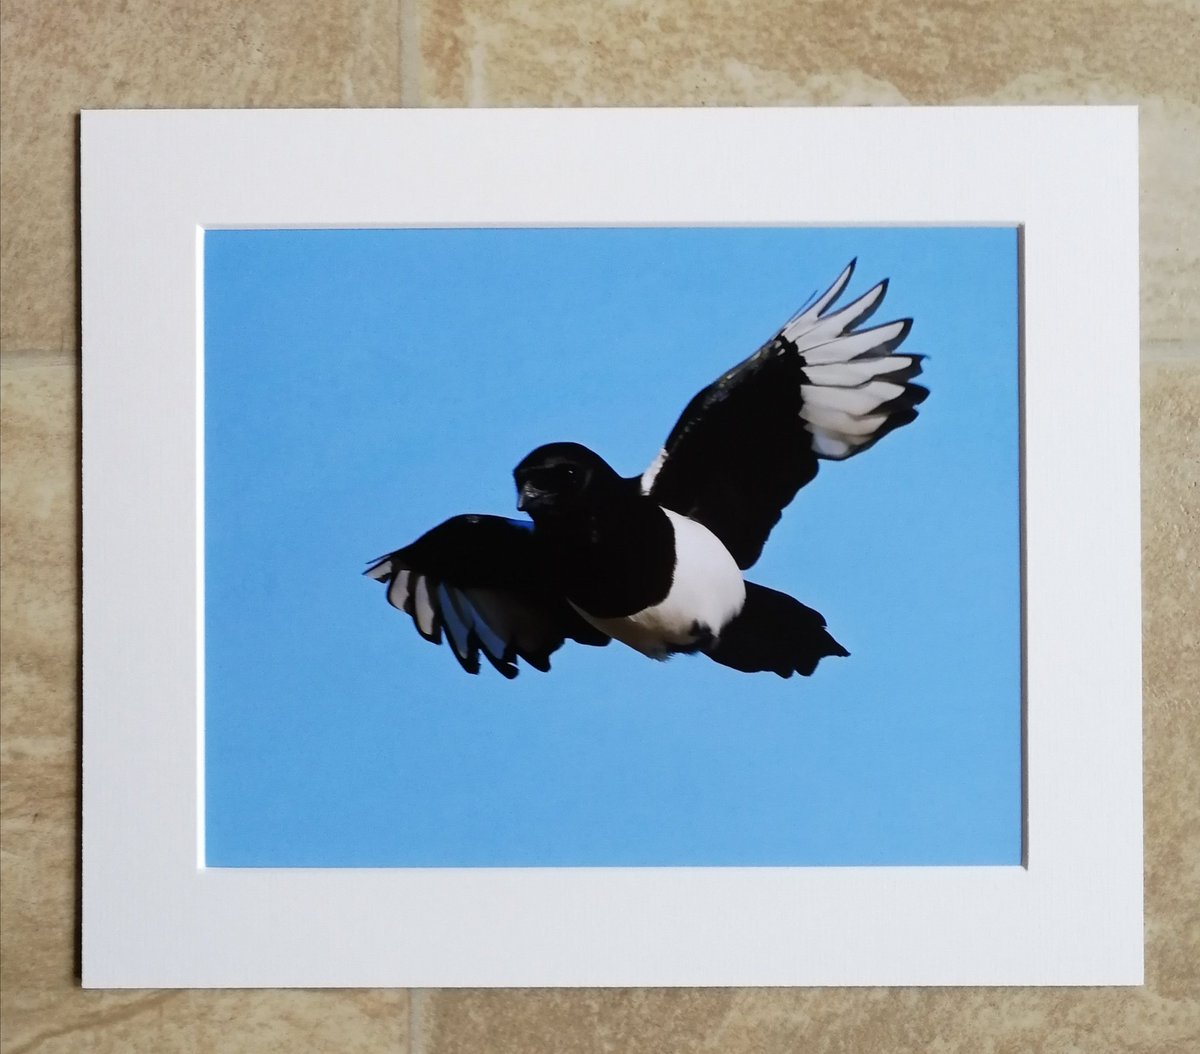 'Super Magpie' 10x8 mounted print.  You can buy it here; https://www.carlbovis.com/product-page/super-magpie-10x8-mounted-print 